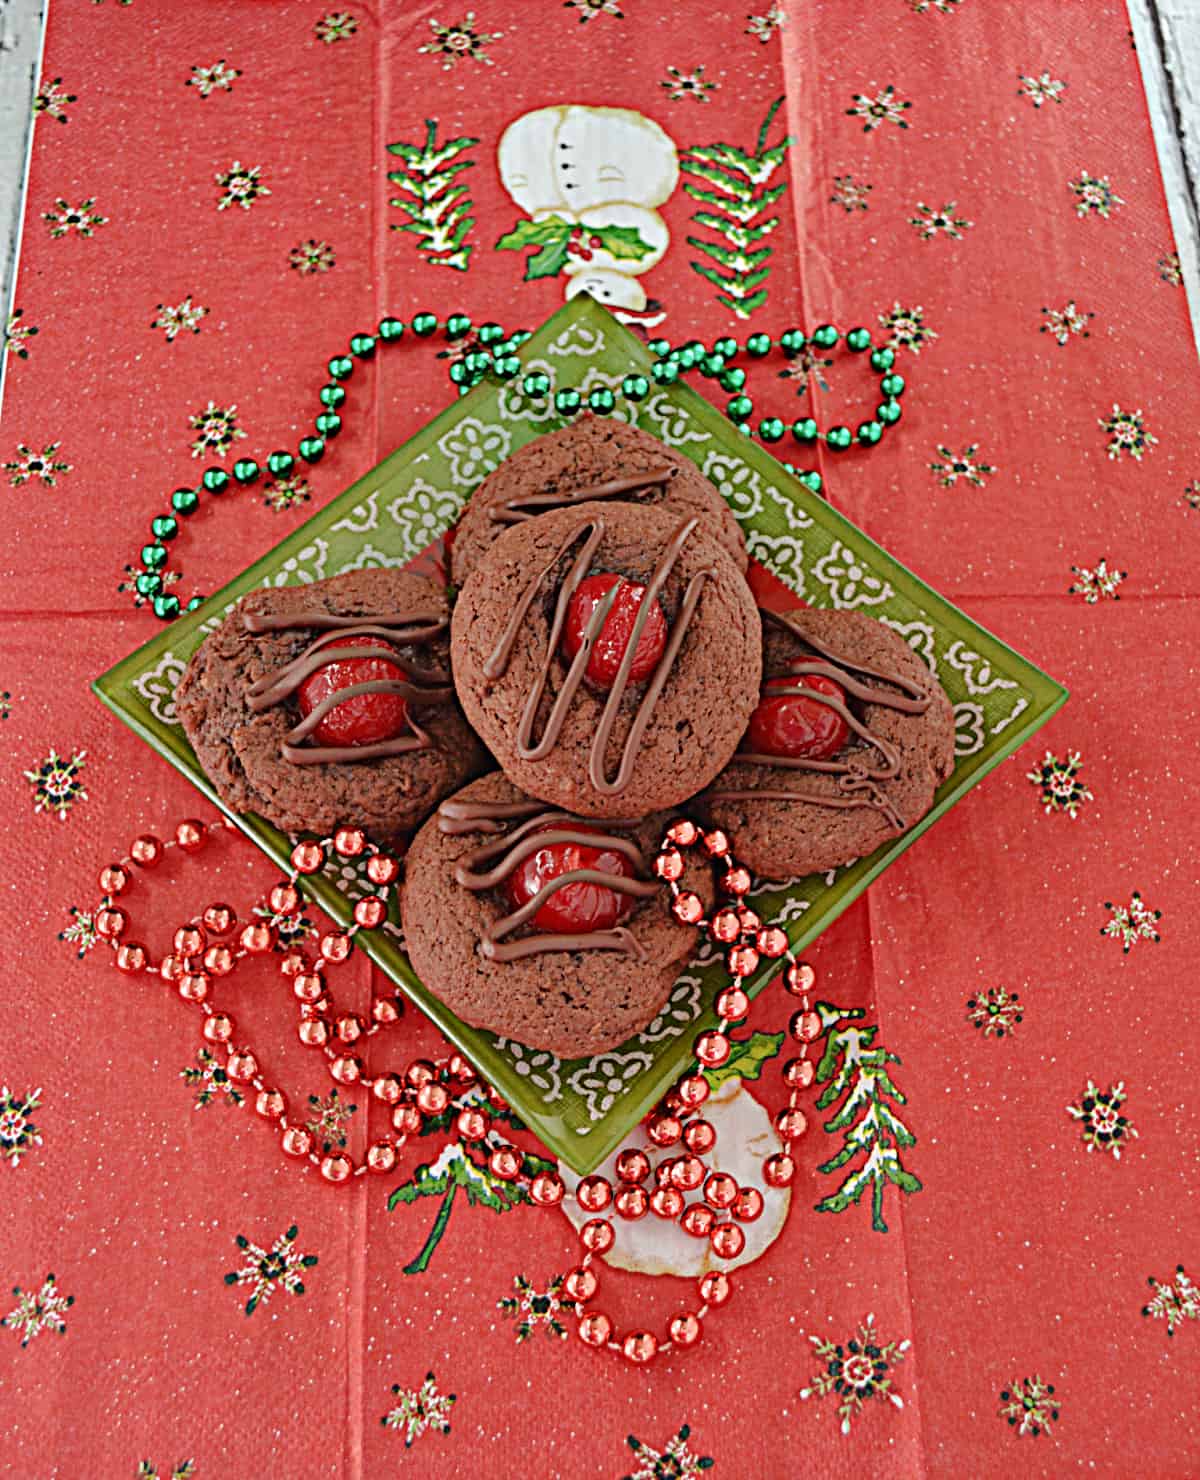 A small plate piled with chocolate covered cherry thumbprint cookies.